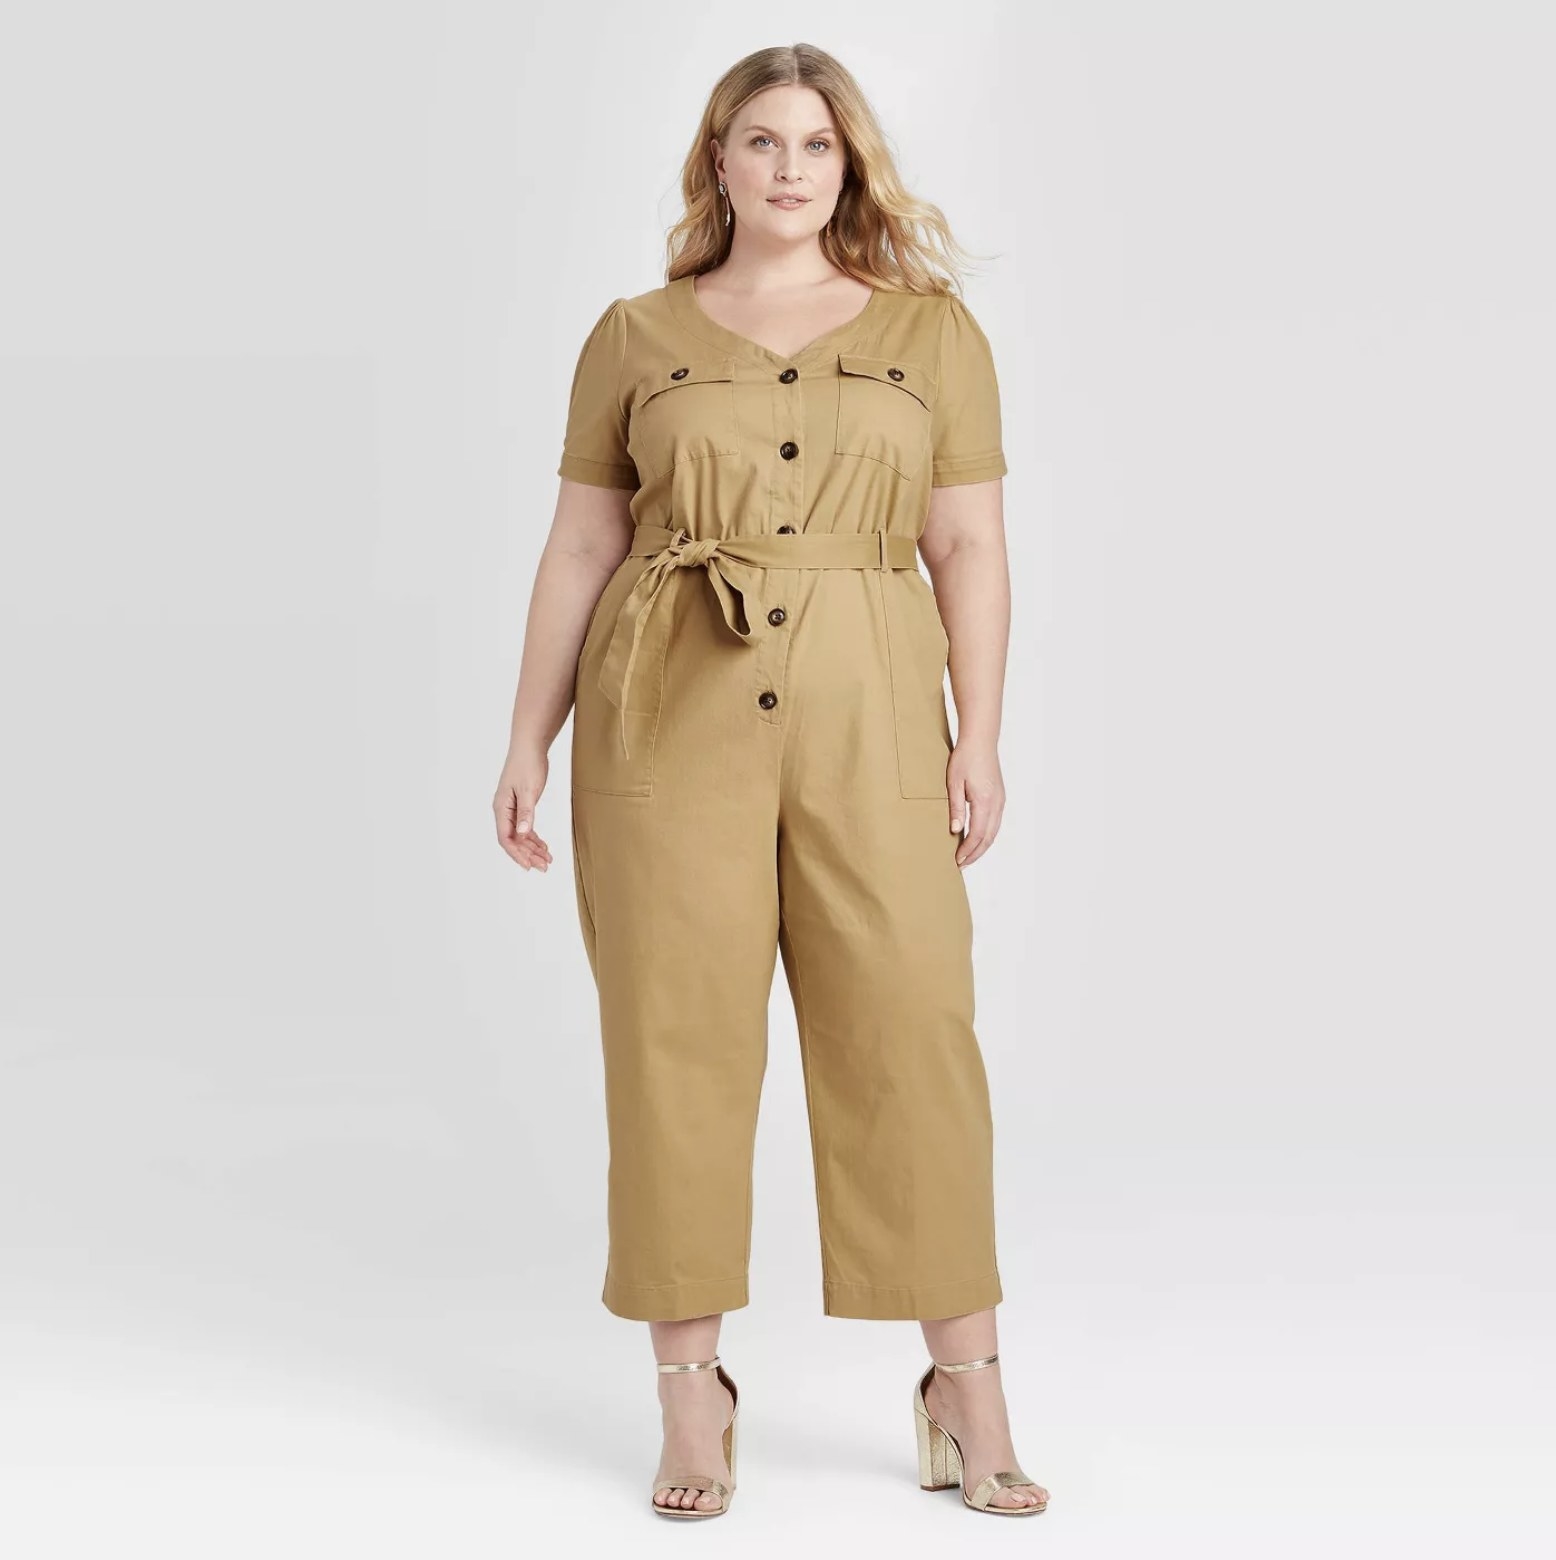 Model wears tan utility jumpsuit with matching heels